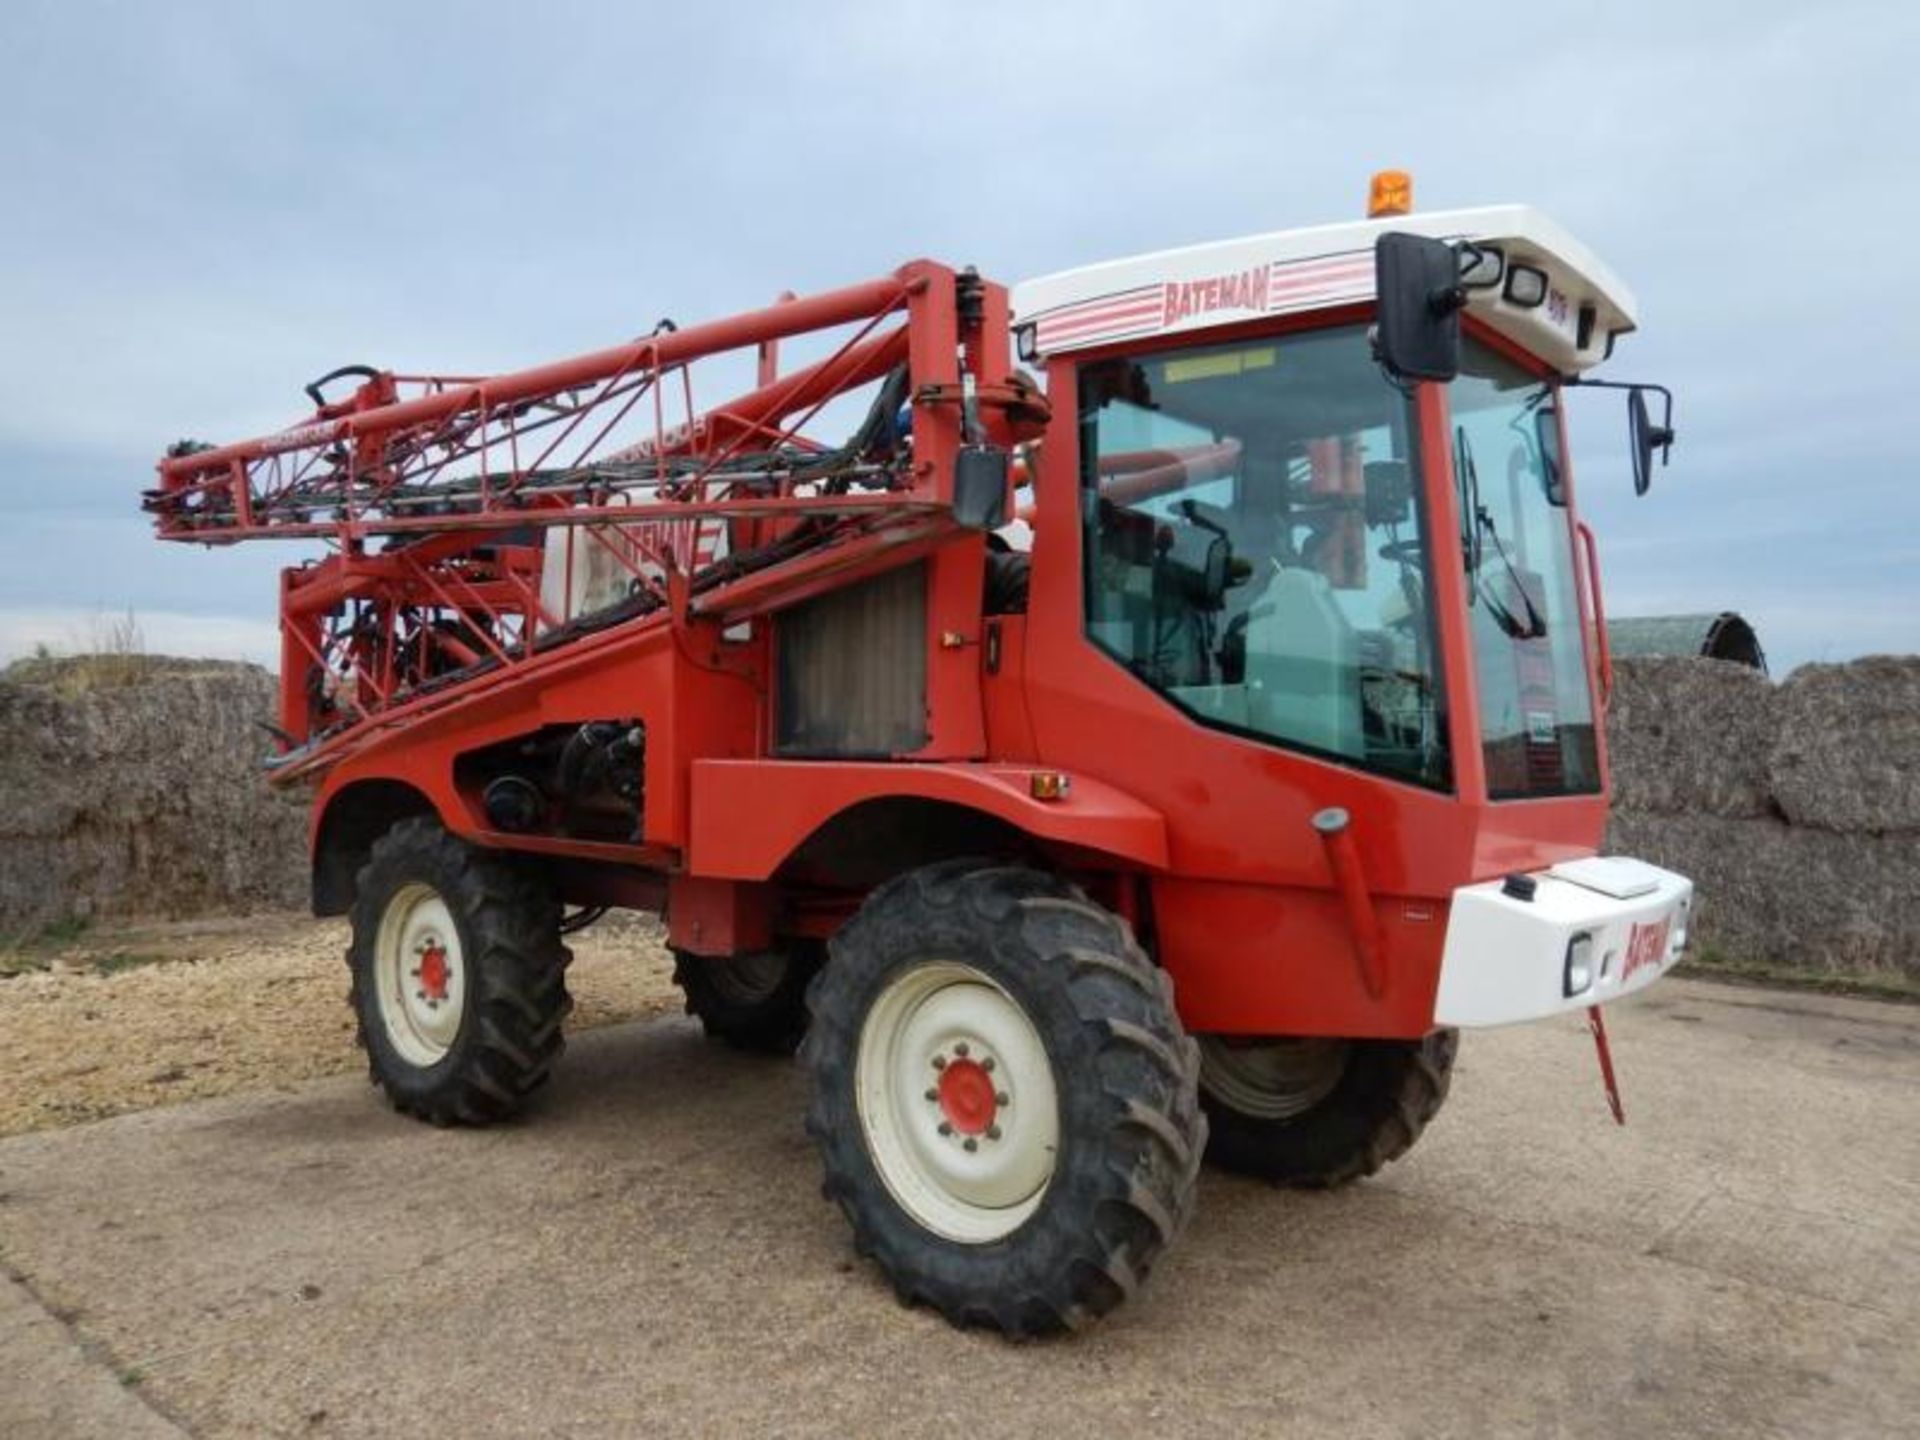 2005 BATEMAN RB25 Contour 4wd 4ws SELF-PROPELLED SPRAYER Fitted with John Deere 175hp 6cylinder